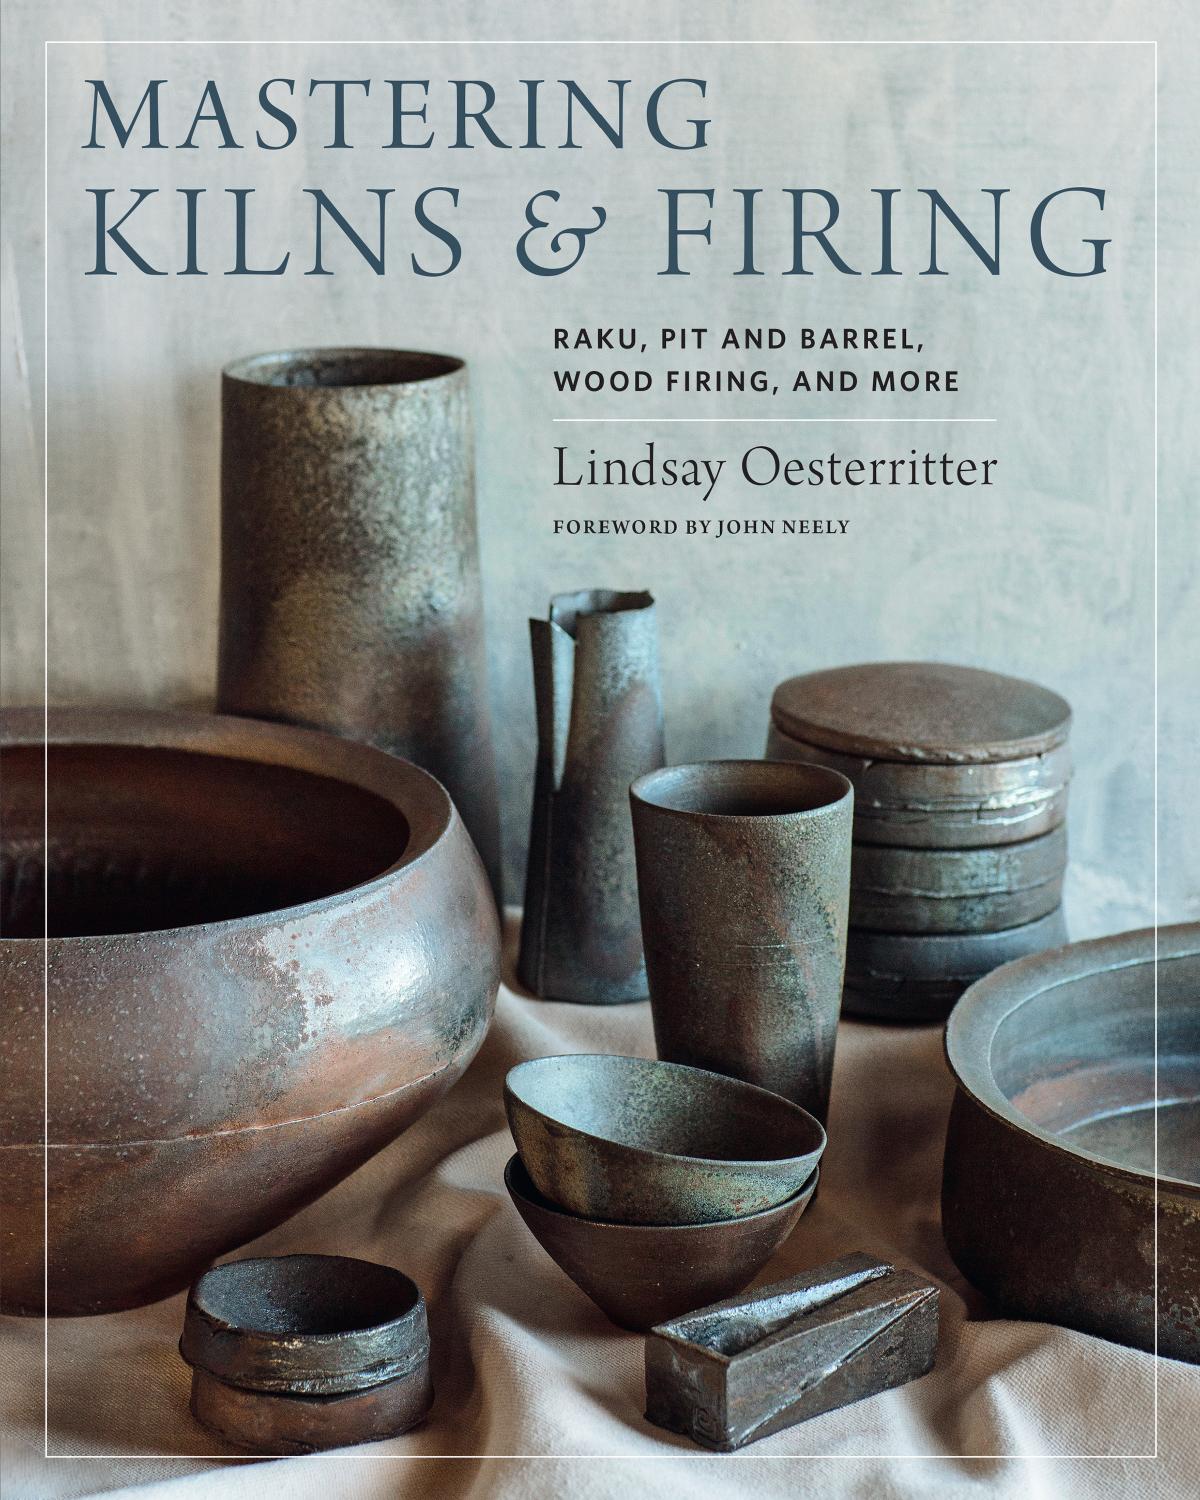 Mastering Kilns and Firing by Lindsay Oesterritter